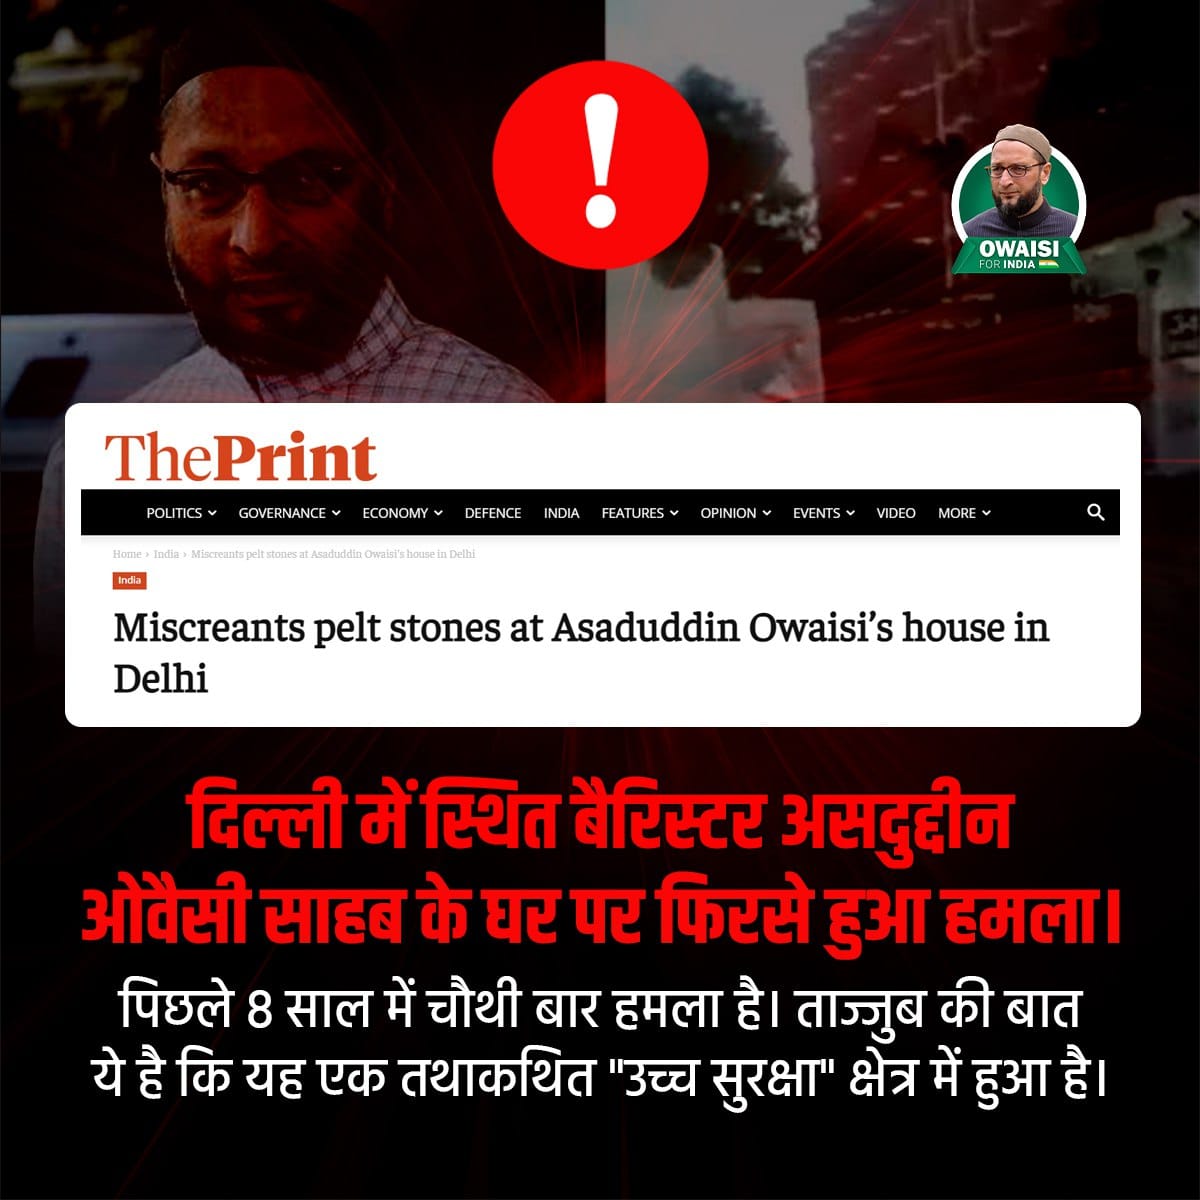 This Is The 4th Time That His House Has Been Attacked By Some Cowardly Miscreants, When Will @DelhiPolice Take Action On These Goons? 

Home Minister @AmitShah Must Intervene & Take Action & Should Ensure The Safety Of Owaisi Sahab.
#LongLiveOwaisi